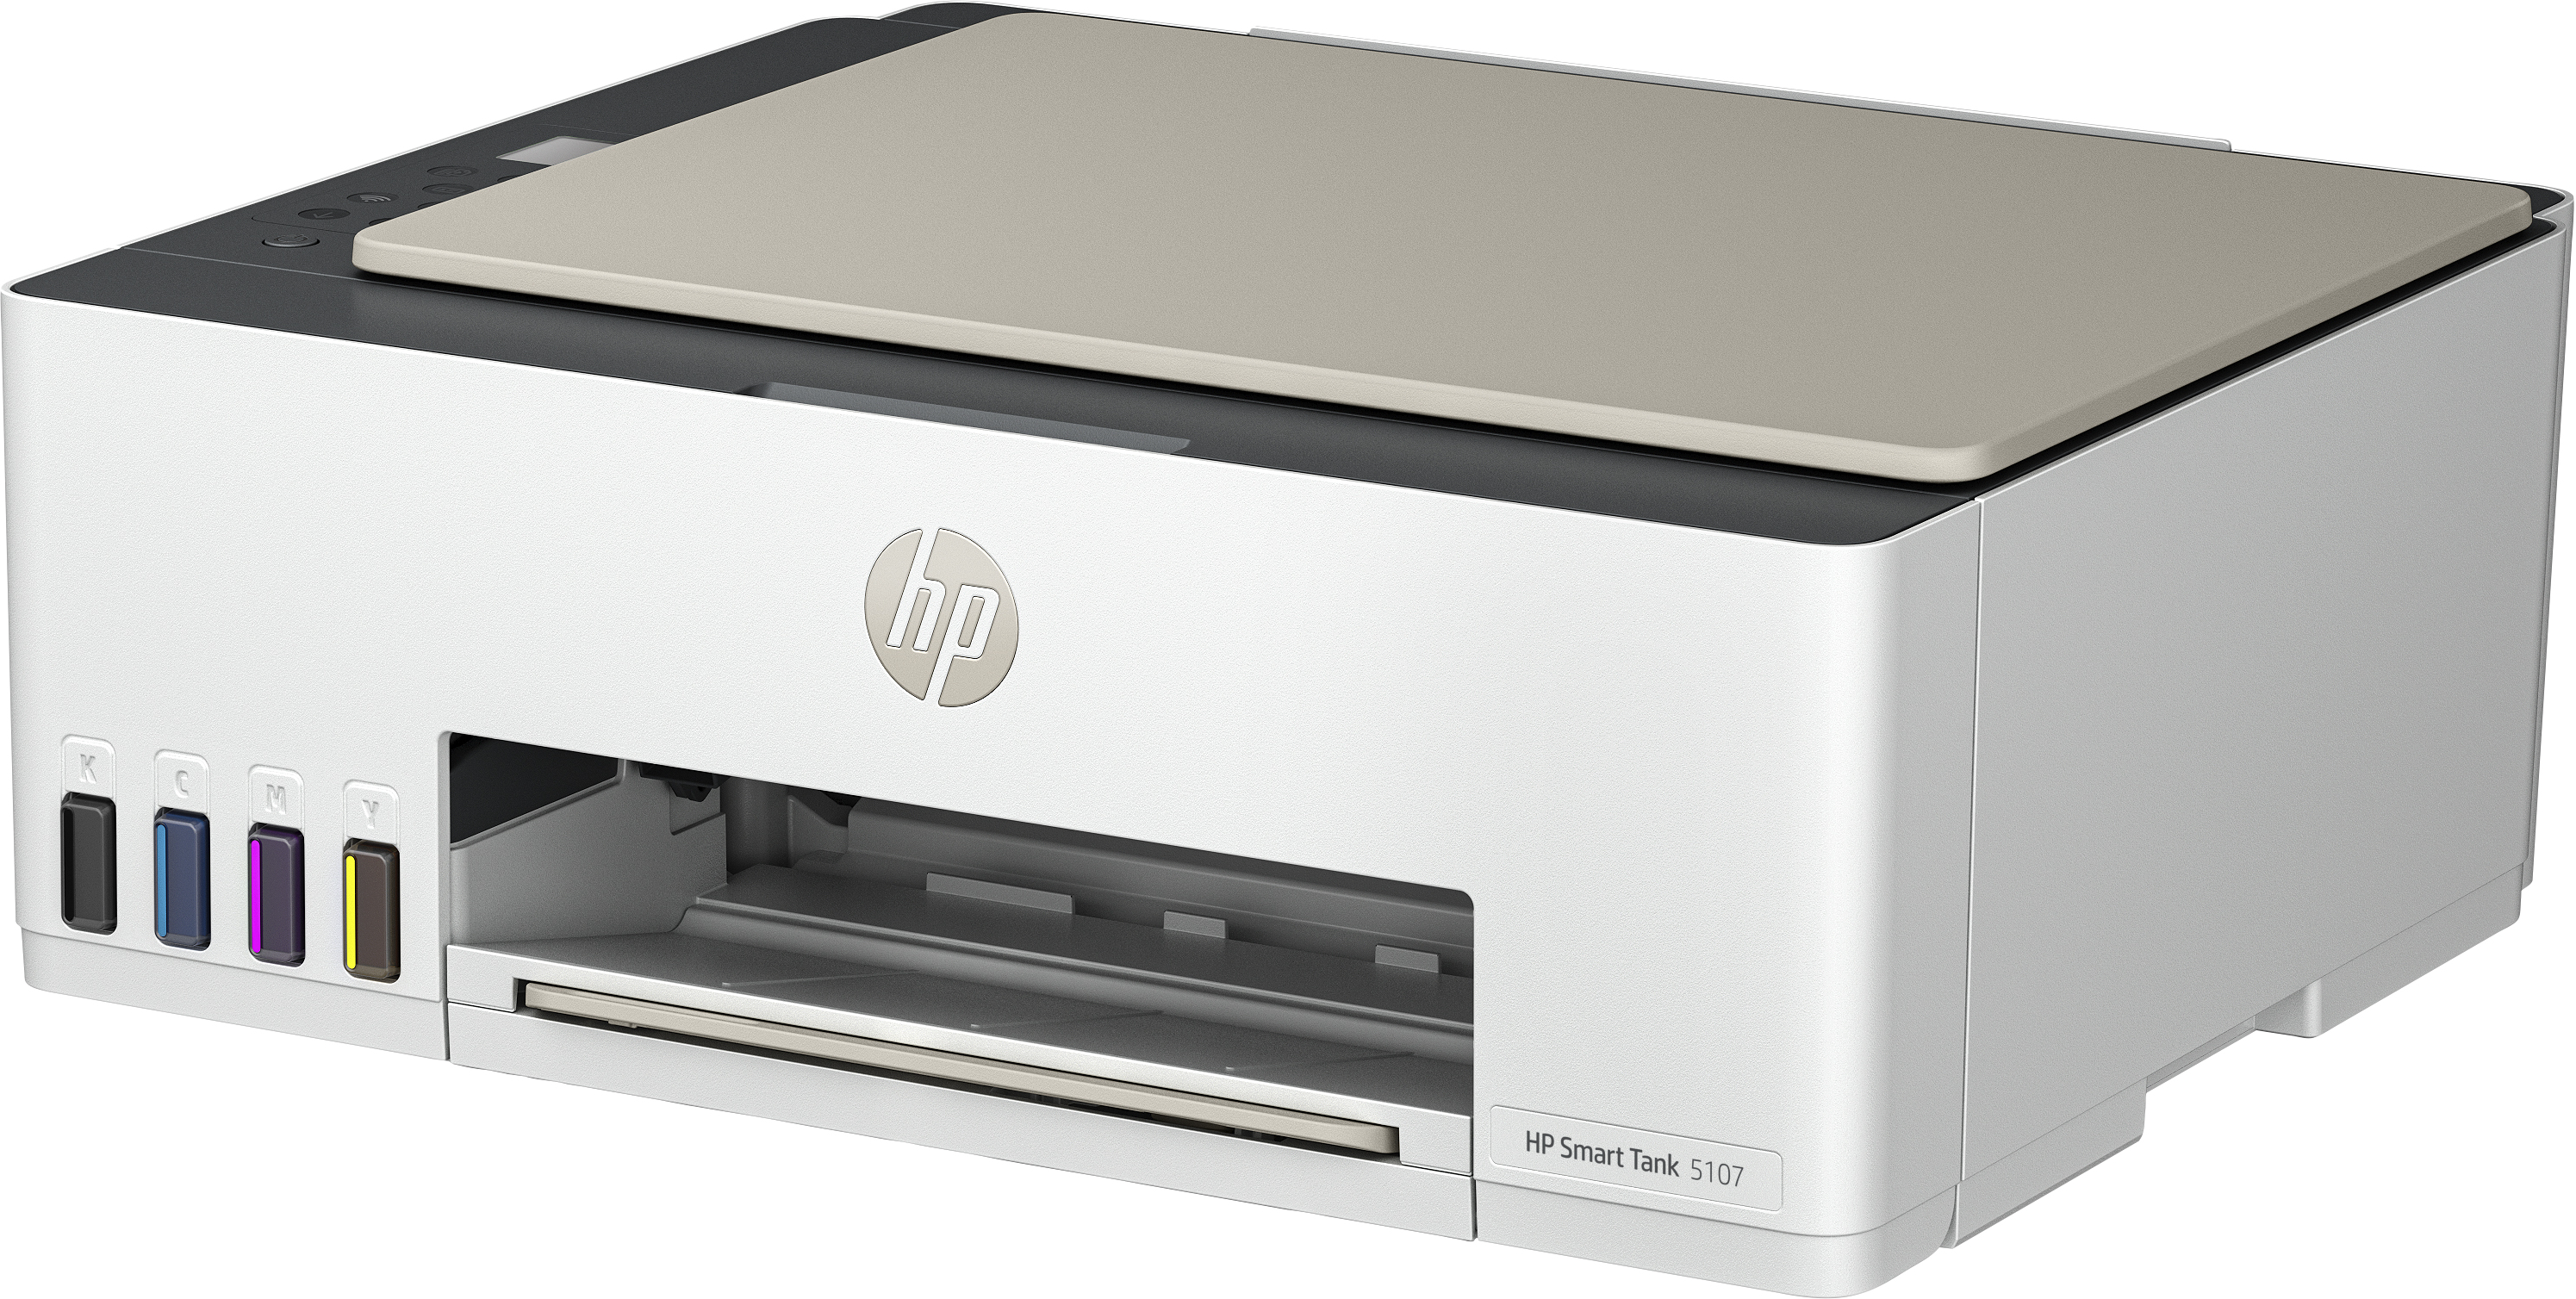 HP Smart Tank 5107 All-in-one up to 12ppm